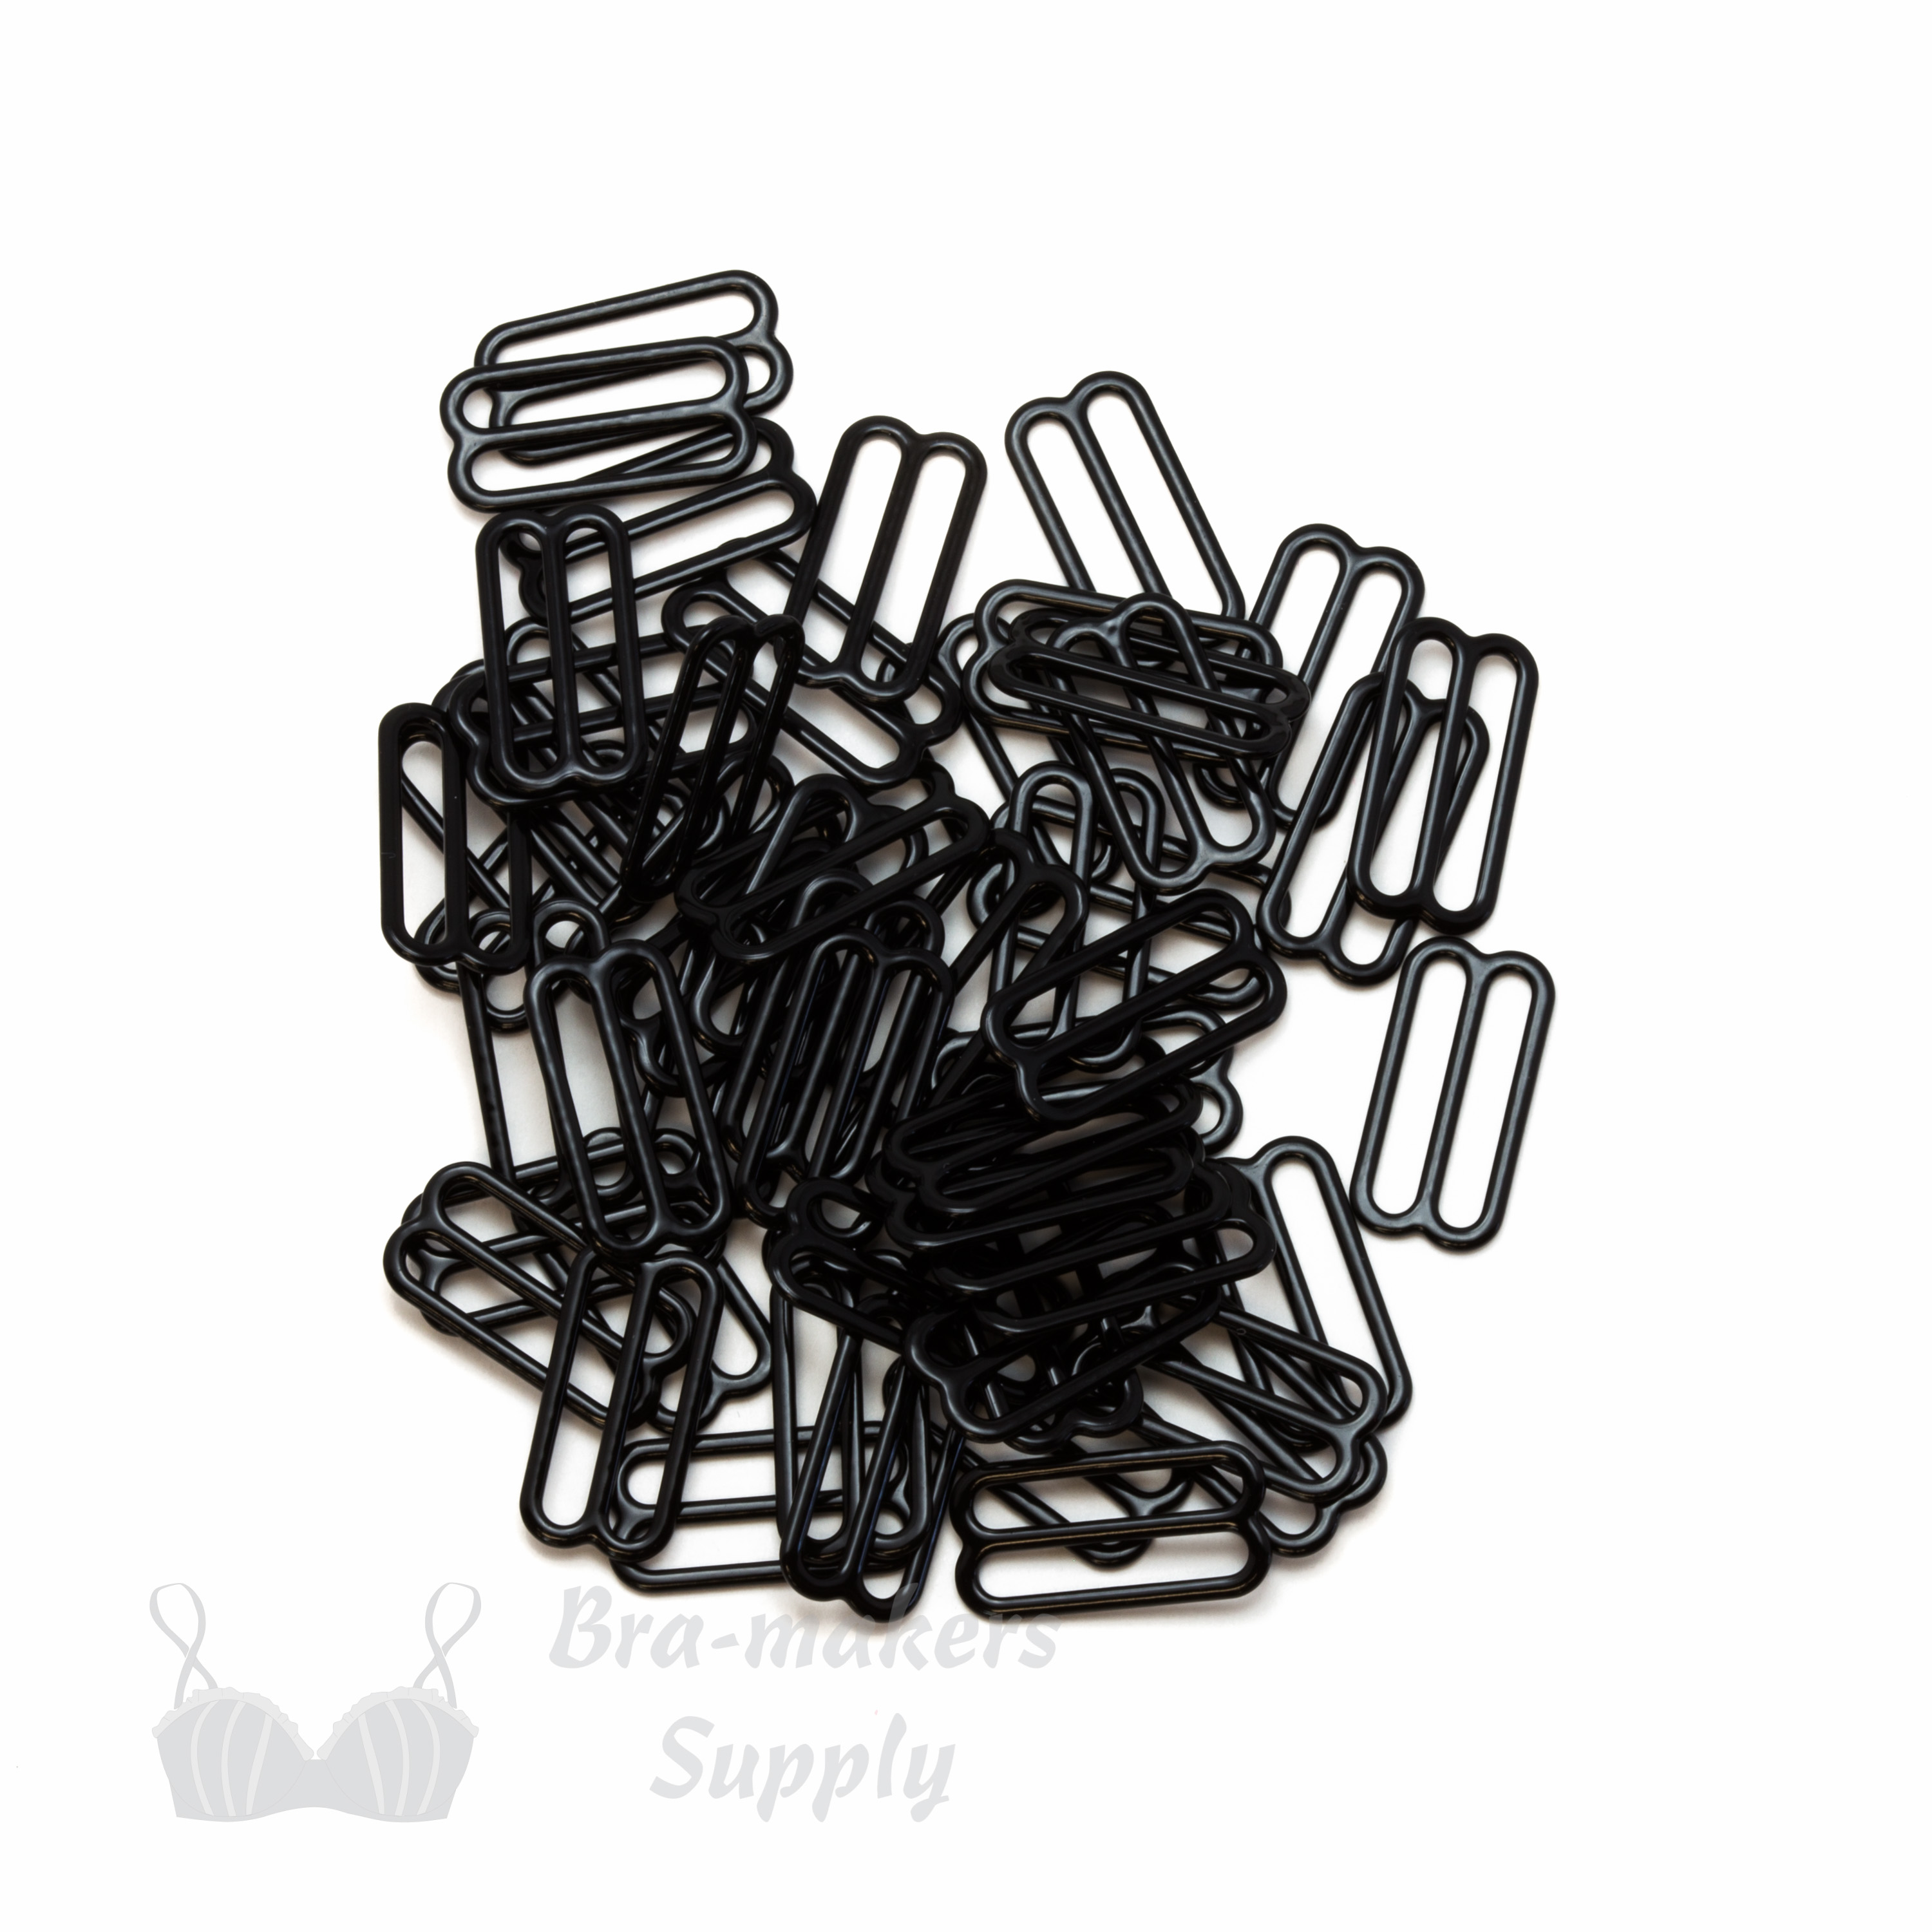 three quarters inch 19mm RM-600 S black nylon coated metal rings sliders or anthracite Pantone 19-4007 from Bra-Makers Supply 100 sliders shown